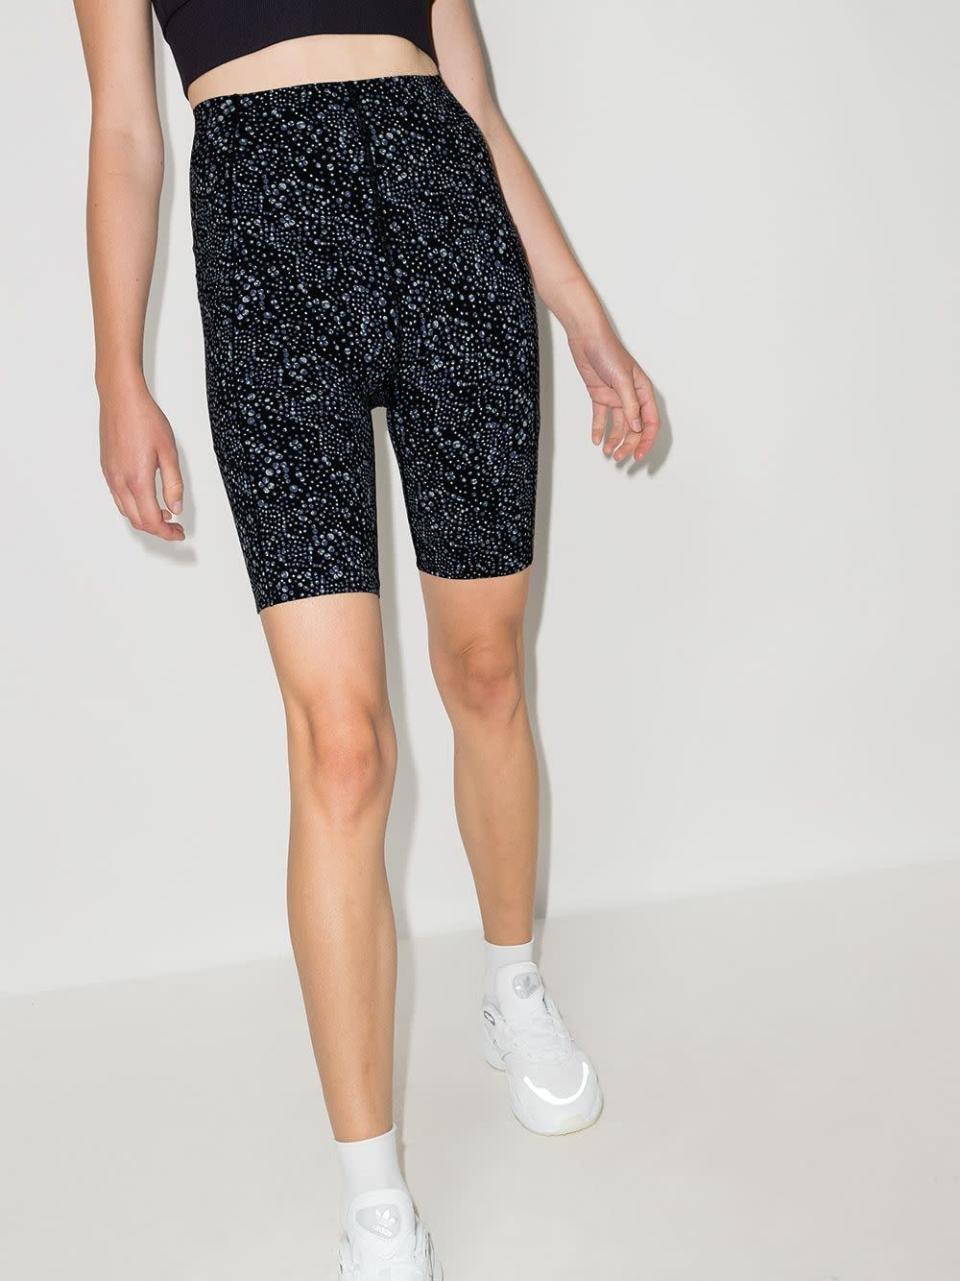 <p><strong>Sweaty Betty</strong></p><p>farfetch.com</p><p><a href="https://go.redirectingat.com?id=74968X1596630&url=https%3A%2F%2Fwww.farfetch.com%2Fshopping%2Fwomen%2Fsweaty-betty-power-high-waisted-9-cycling-shorts-item-16910634.aspx&sref=https%3A%2F%2Fwww.cosmopolitan.com%2Fstyle-beauty%2Fg38380861%2Ffarfetch-cyber-monday-2021%2F" rel="nofollow noopener" target="_blank" data-ylk="slk:Shop Now" class="link rapid-noclick-resp">Shop Now</a></p><p><strong><del>$50</del> <del>$40</del> $24 (20% off)</strong></p><p>Not only do these high-waisted biker shorts have the coolest pattern, but they’re also extremely comfortable for any type of activity.</p>